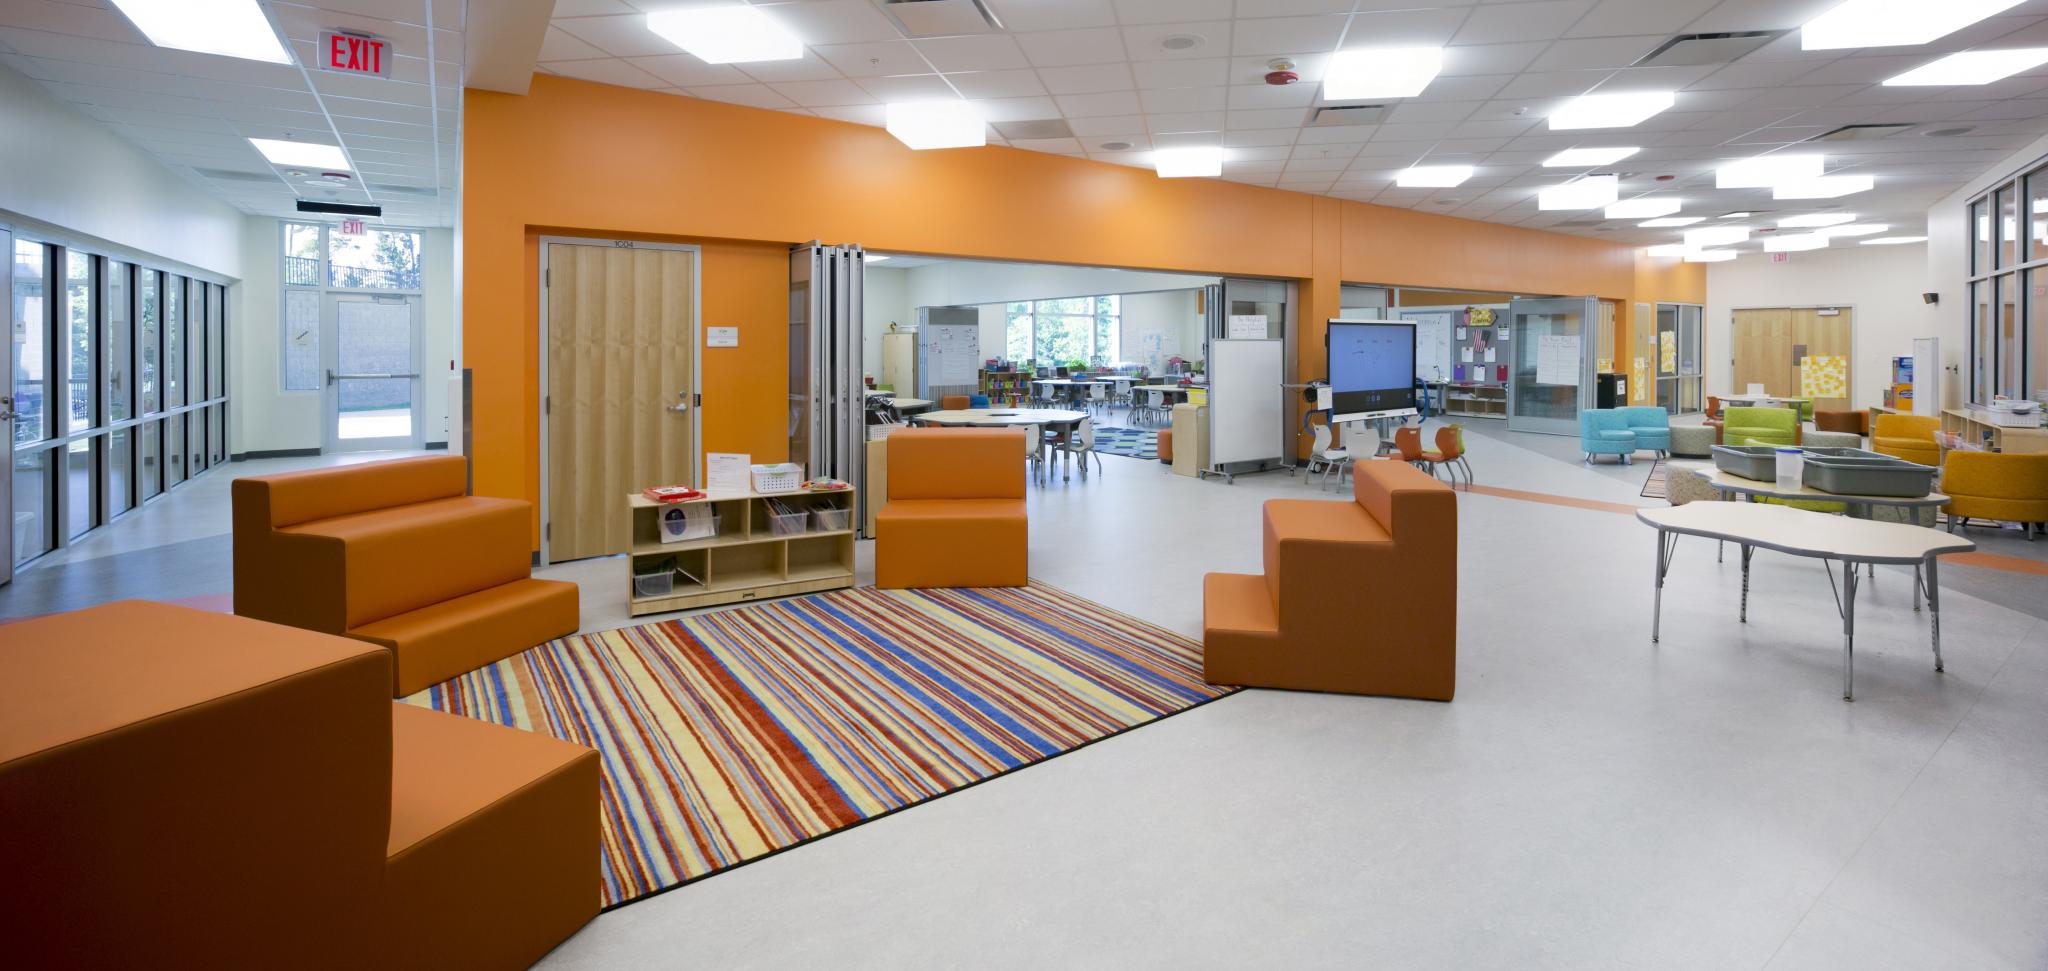 image of learning space